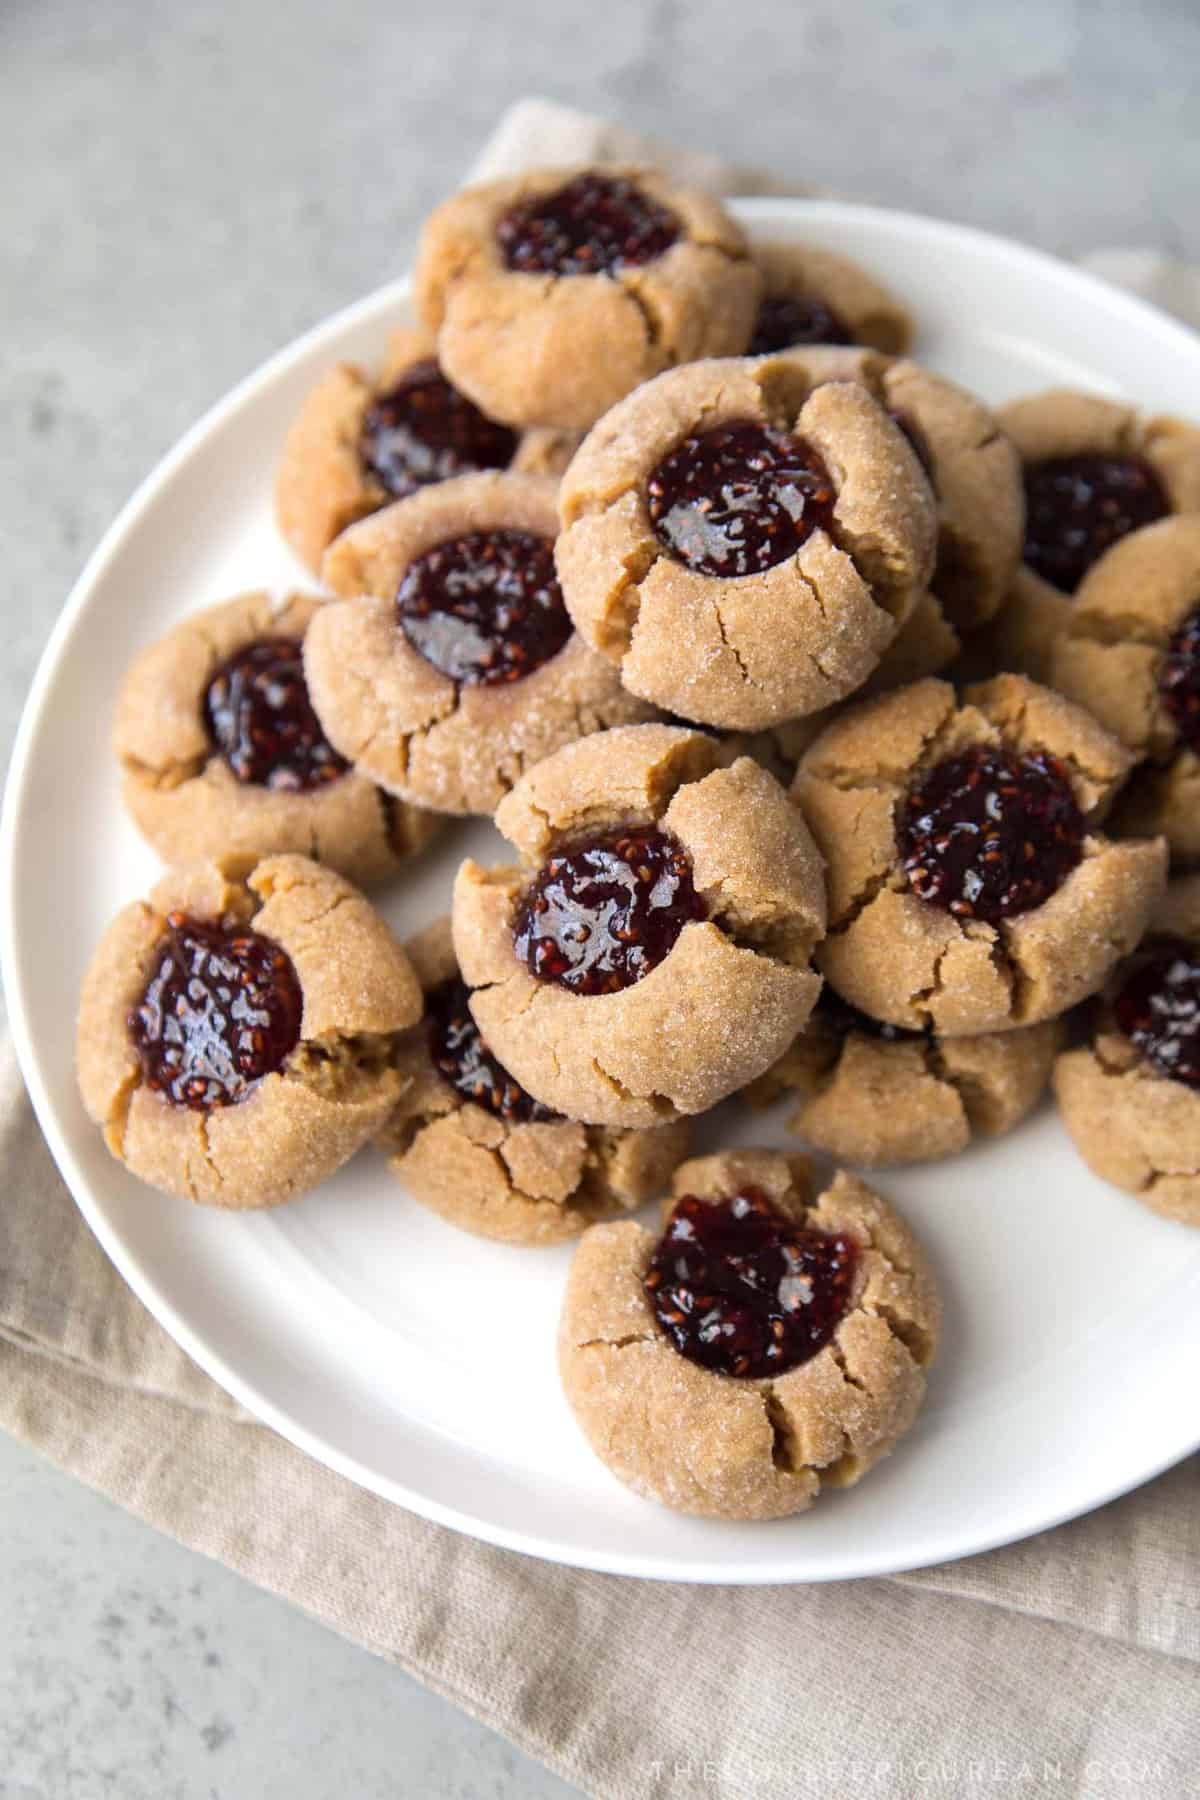 peanut butter thumbprint cookies filled with jelly on white serving plate.